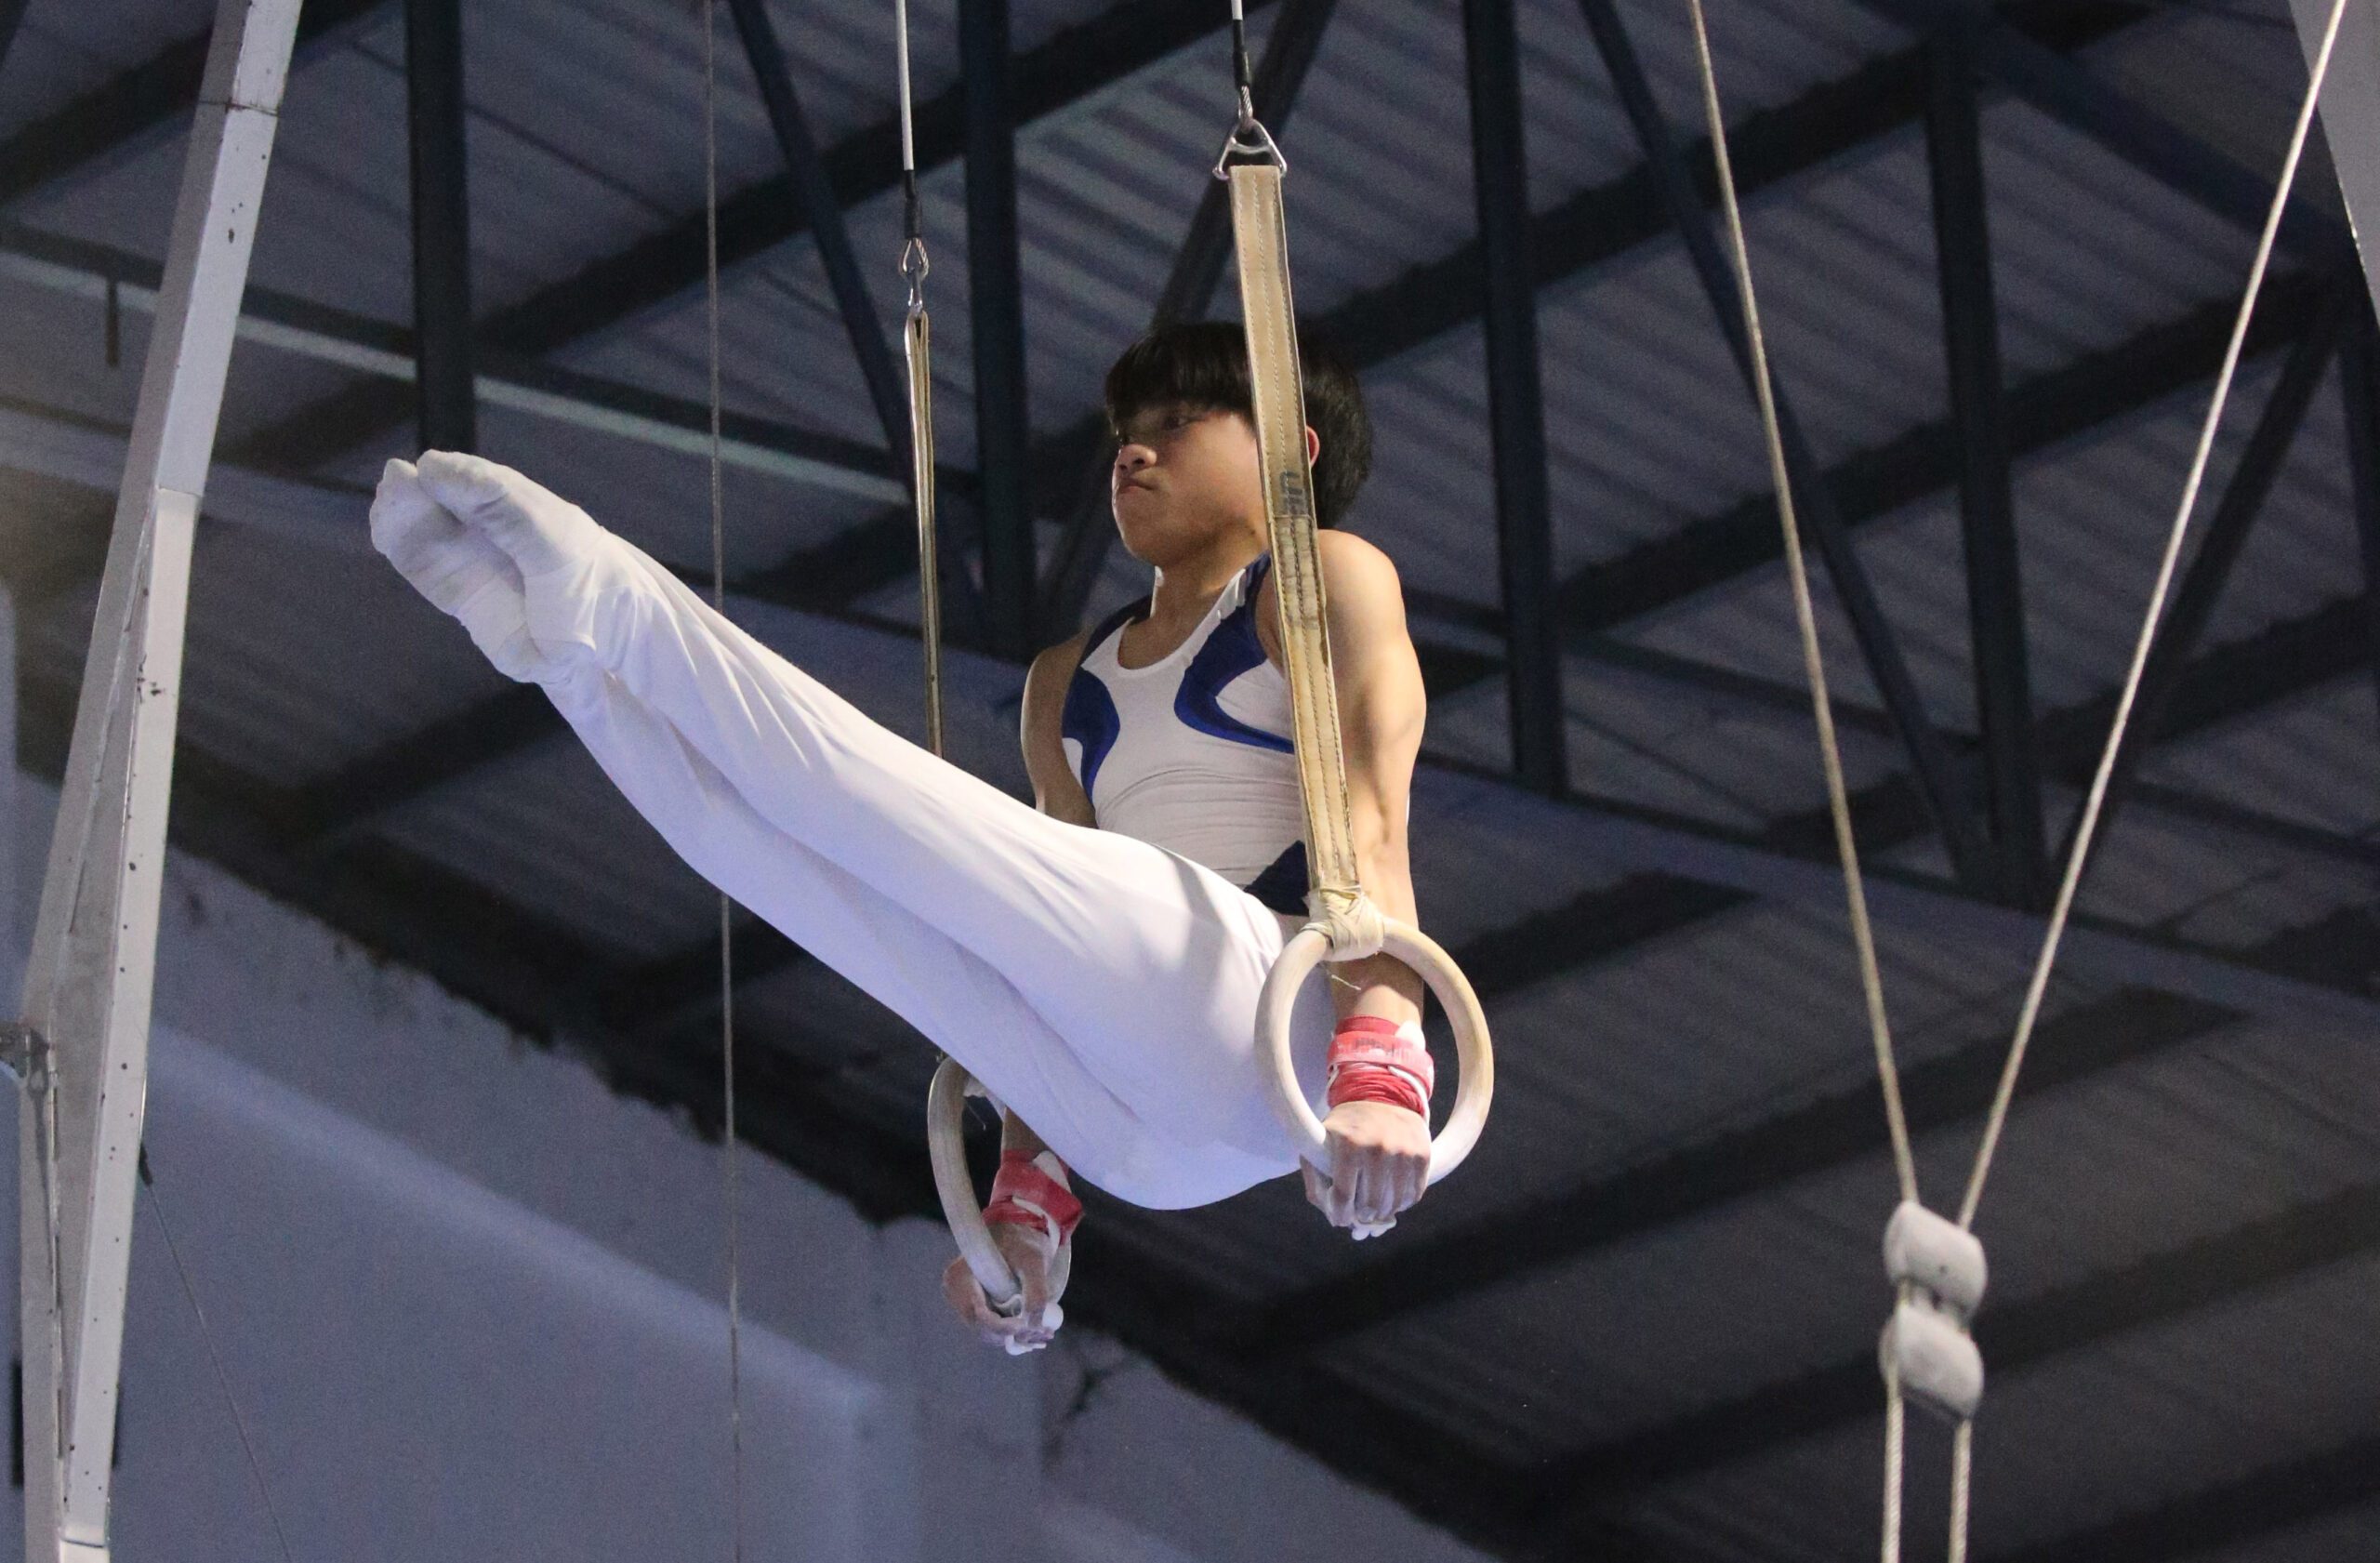 Eldrew Yulo soars with 7 golds in Batang Pinoy gymnastics